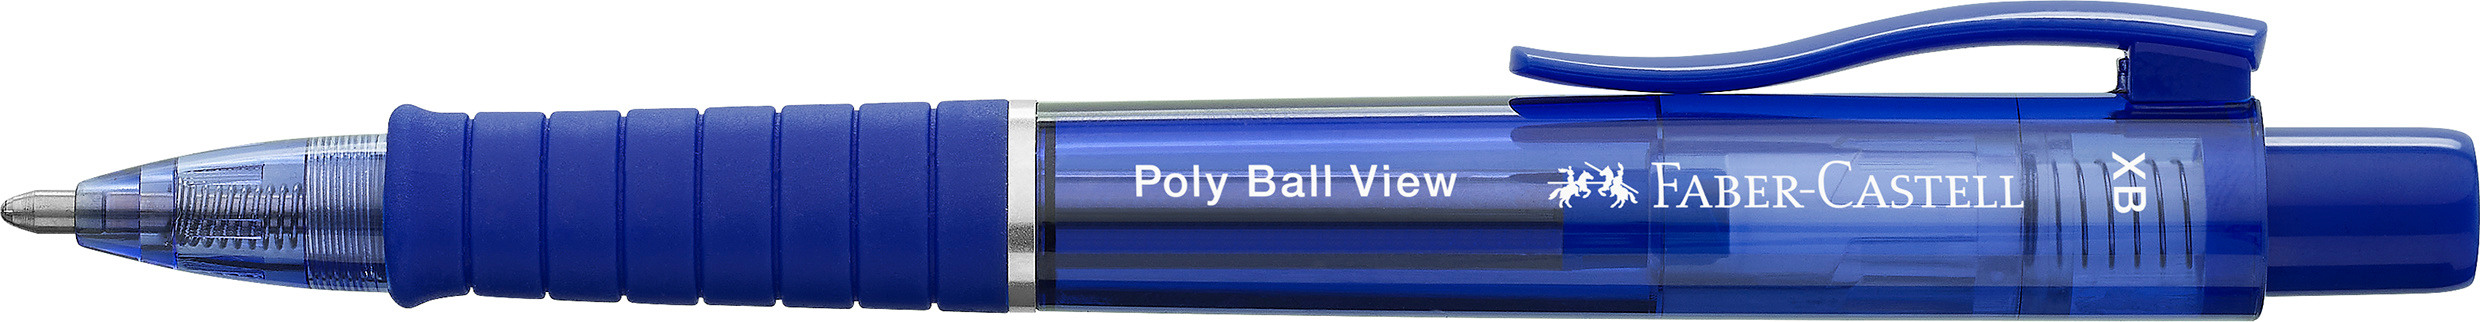 FABER-CASTELL Stylo à bille Poly Ball View 145751 Admiral blue XB